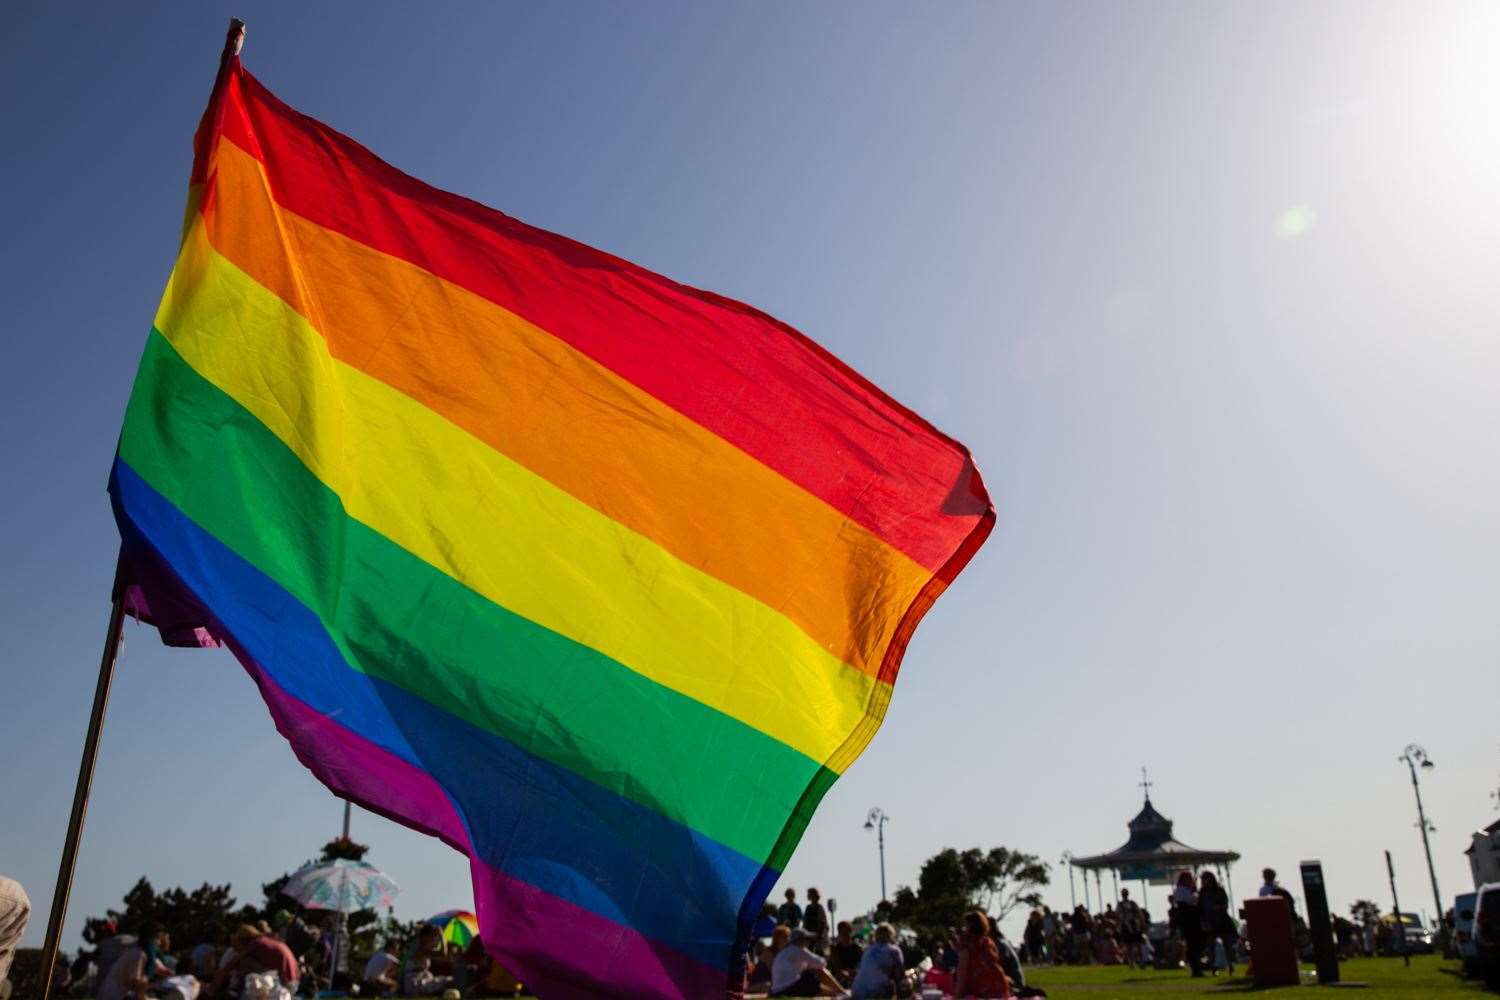 Gravesend is set to host its first physical Pride event next month. Photo: Alex Davies